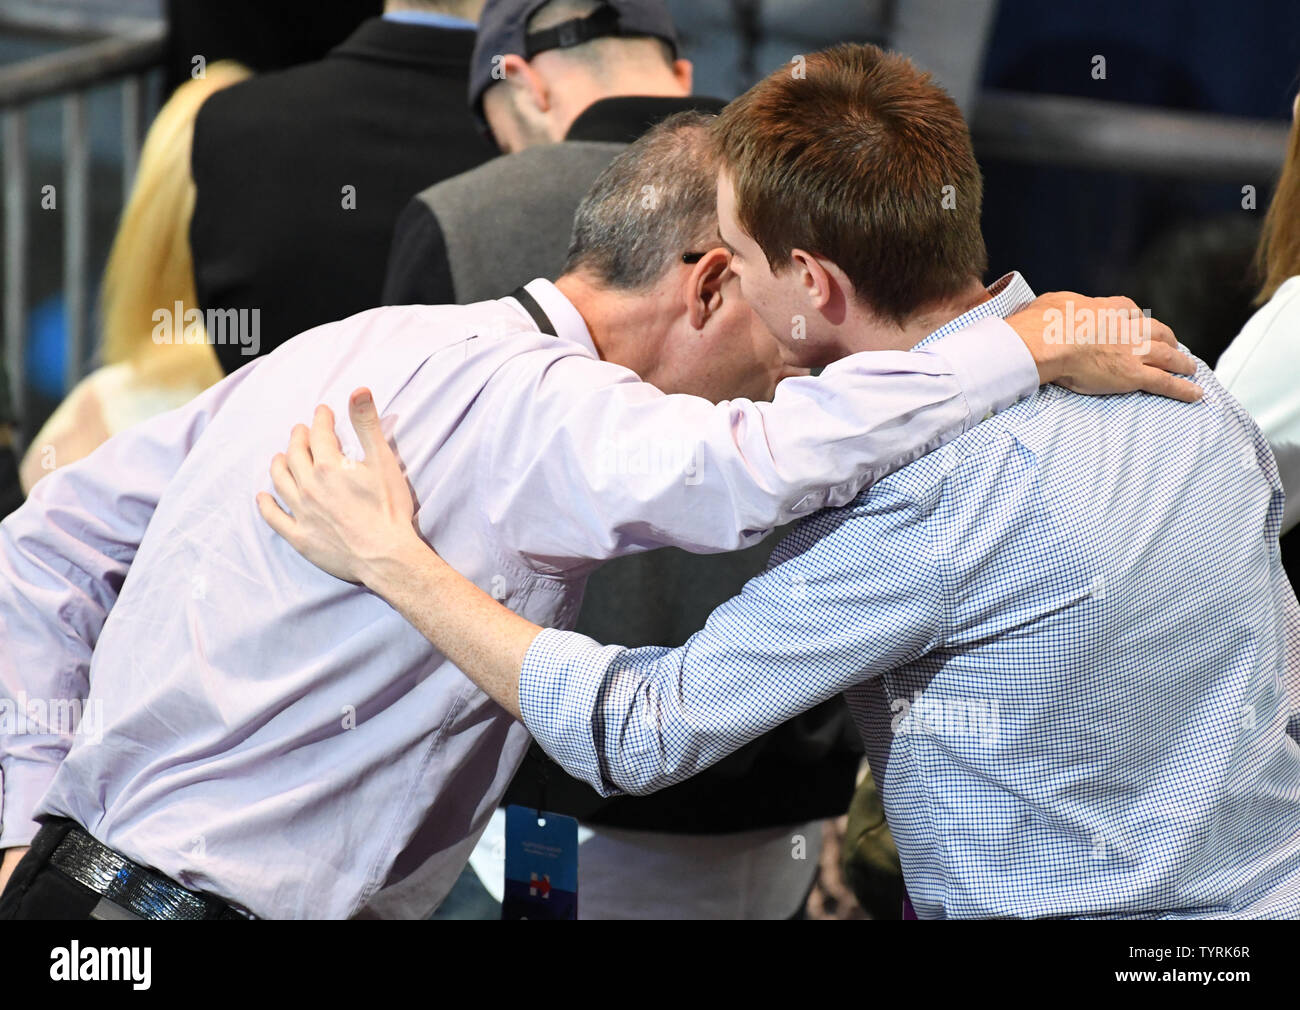 Hillary supporters  console each other as results come in at Democratic presidential candidate Hillary Clinton's election night rally at the Javits Center in New York on November 8, 2016.          Photo by Pat Benic/UPI Stock Photo